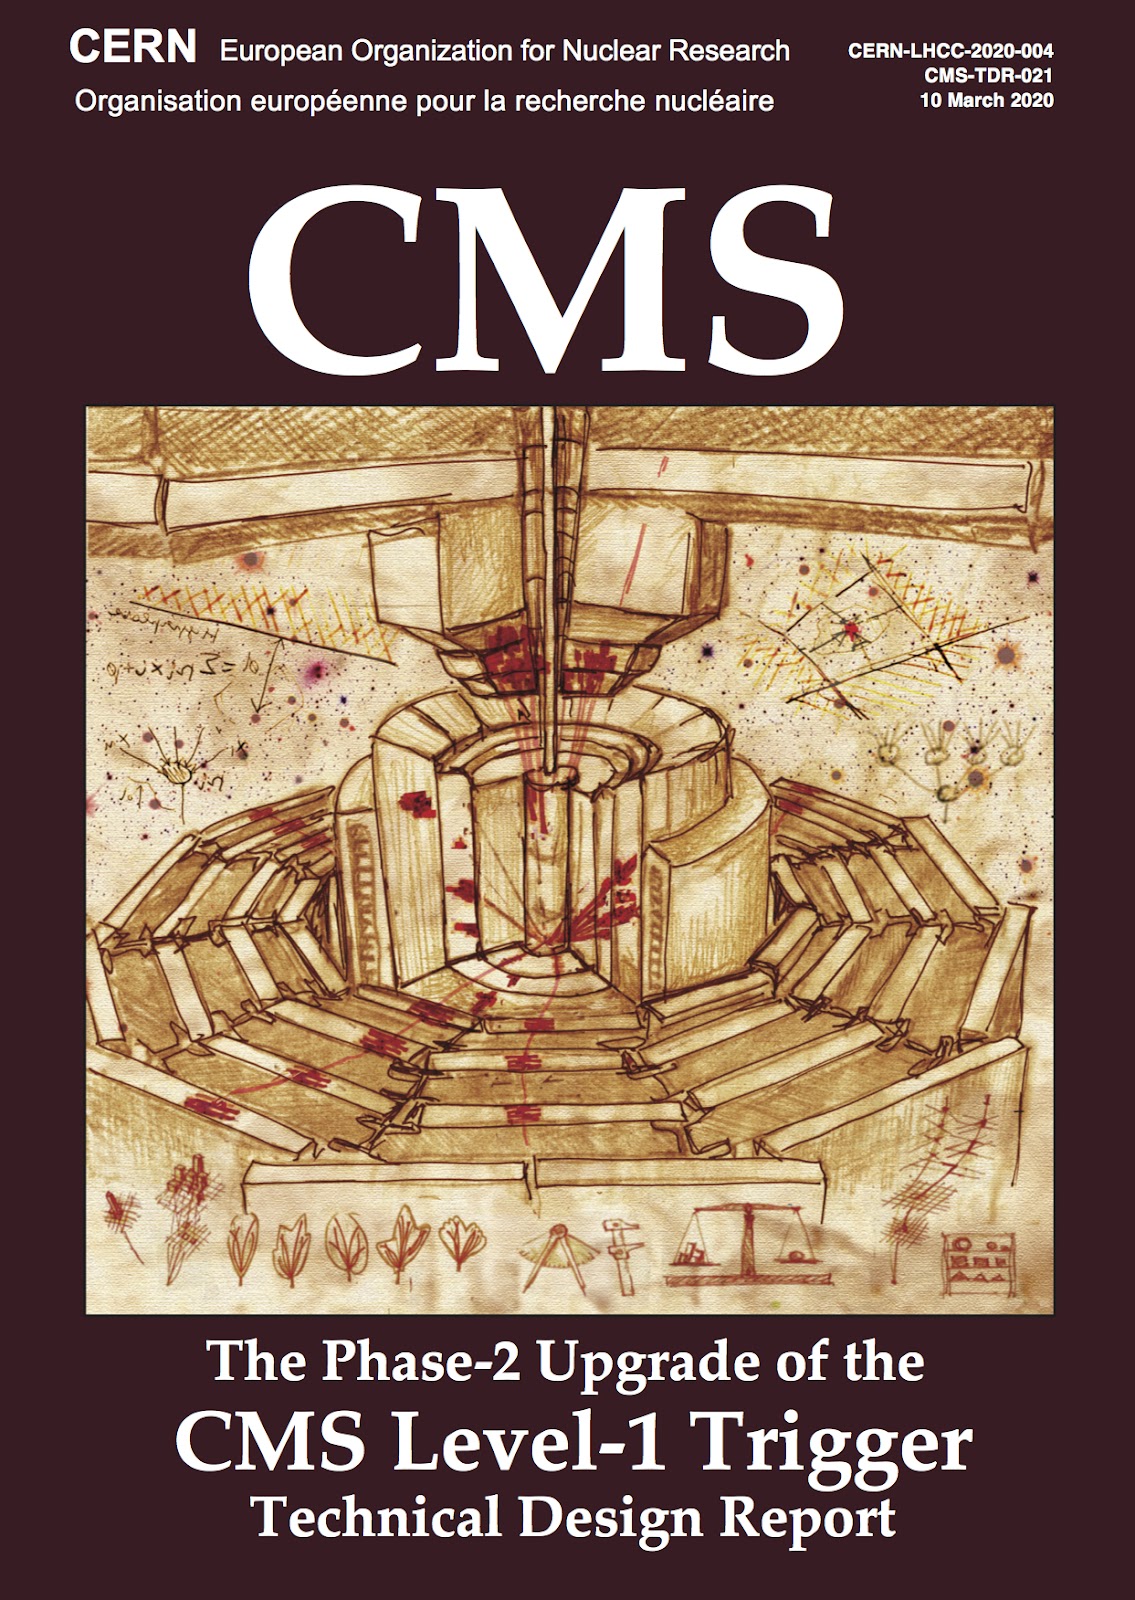 The Phase-2 Upgrade of the CMS Level-1 Trigger cover book